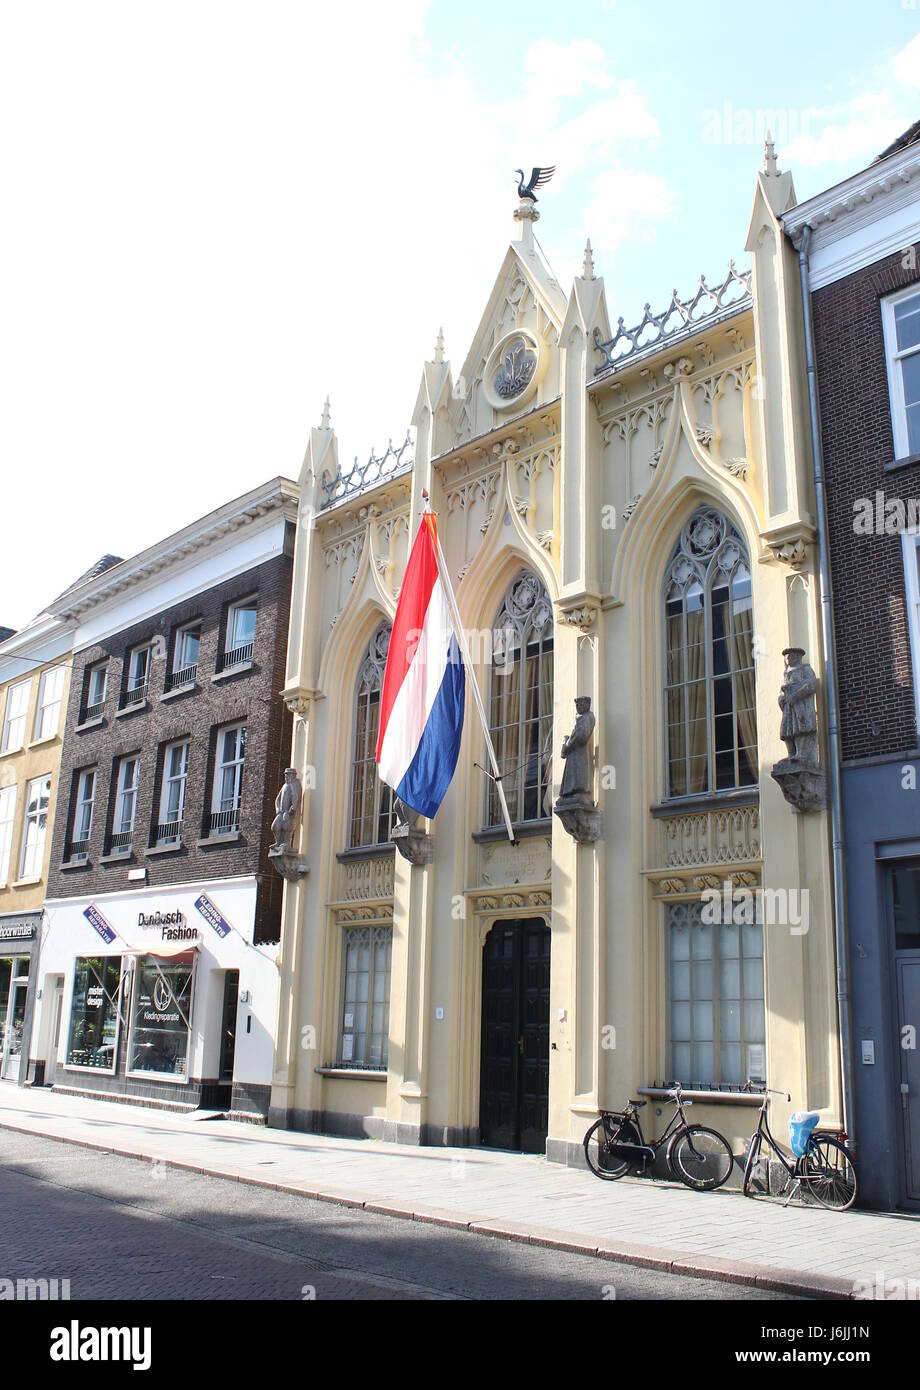 16th century renaissance Zwanenbroedershuis building, Hinthamerstraat in Den Bosch, Netherlands. Seat of Illustrious Brotherhood of Our Blessed Lady. Stock Photo